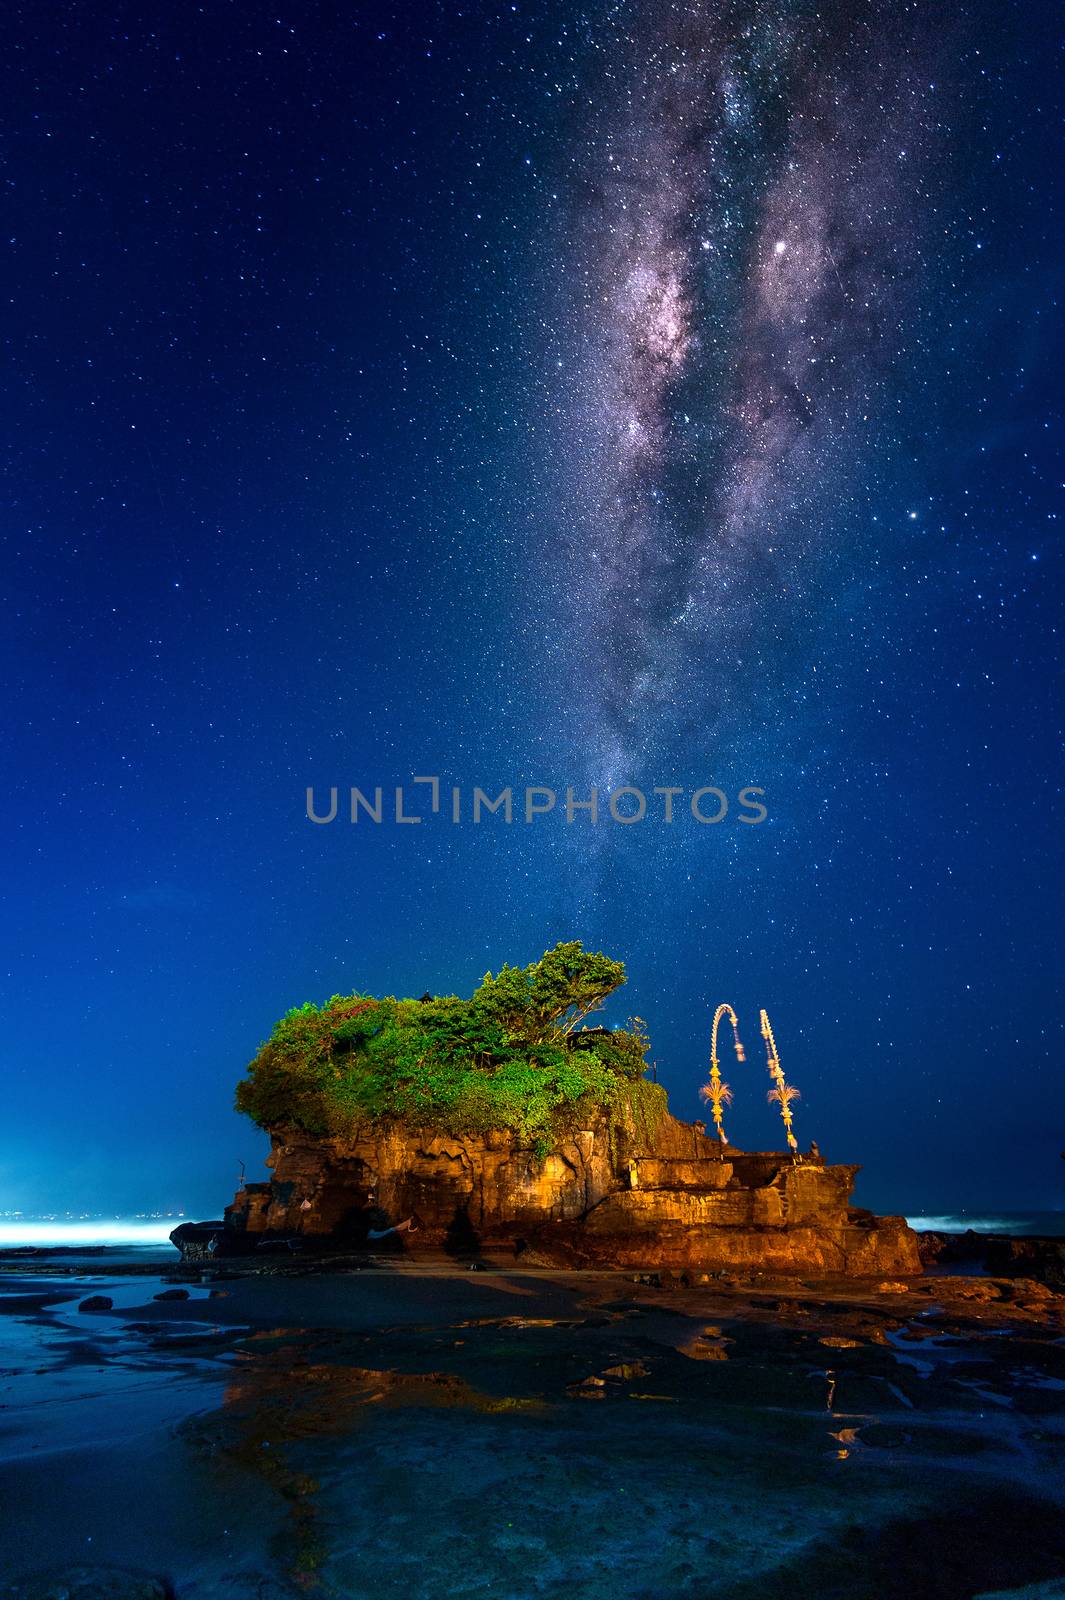 Milky way over Tanah Lot Temple at night in Bali, Indonesia.(Dark) by gutarphotoghaphy